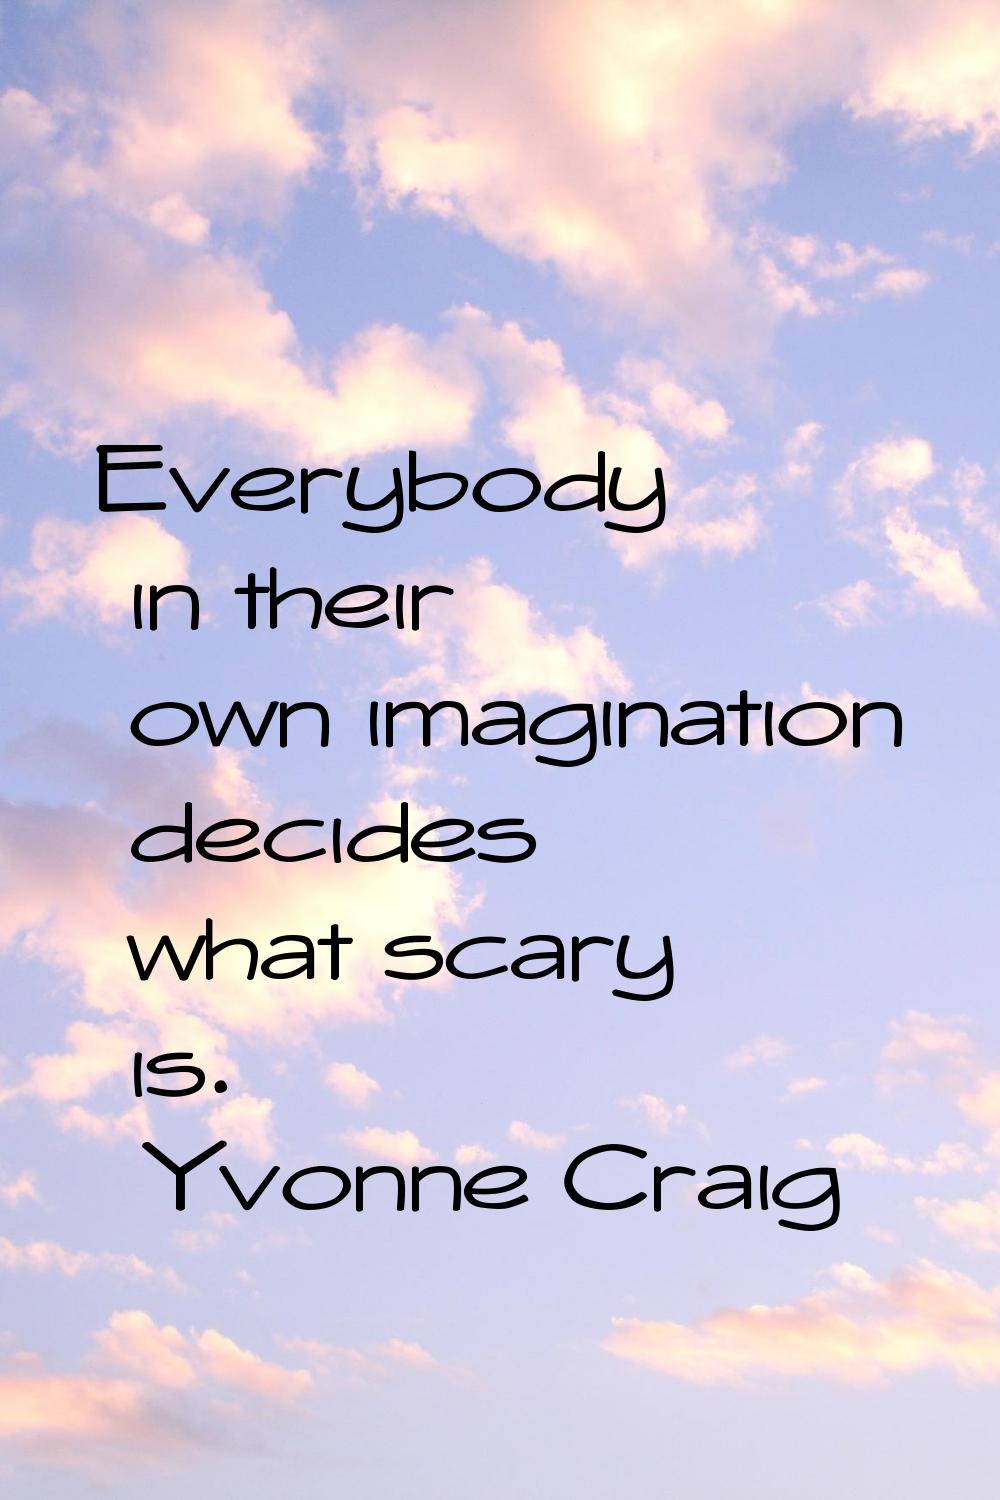 Everybody in their own imagination decides what scary is.